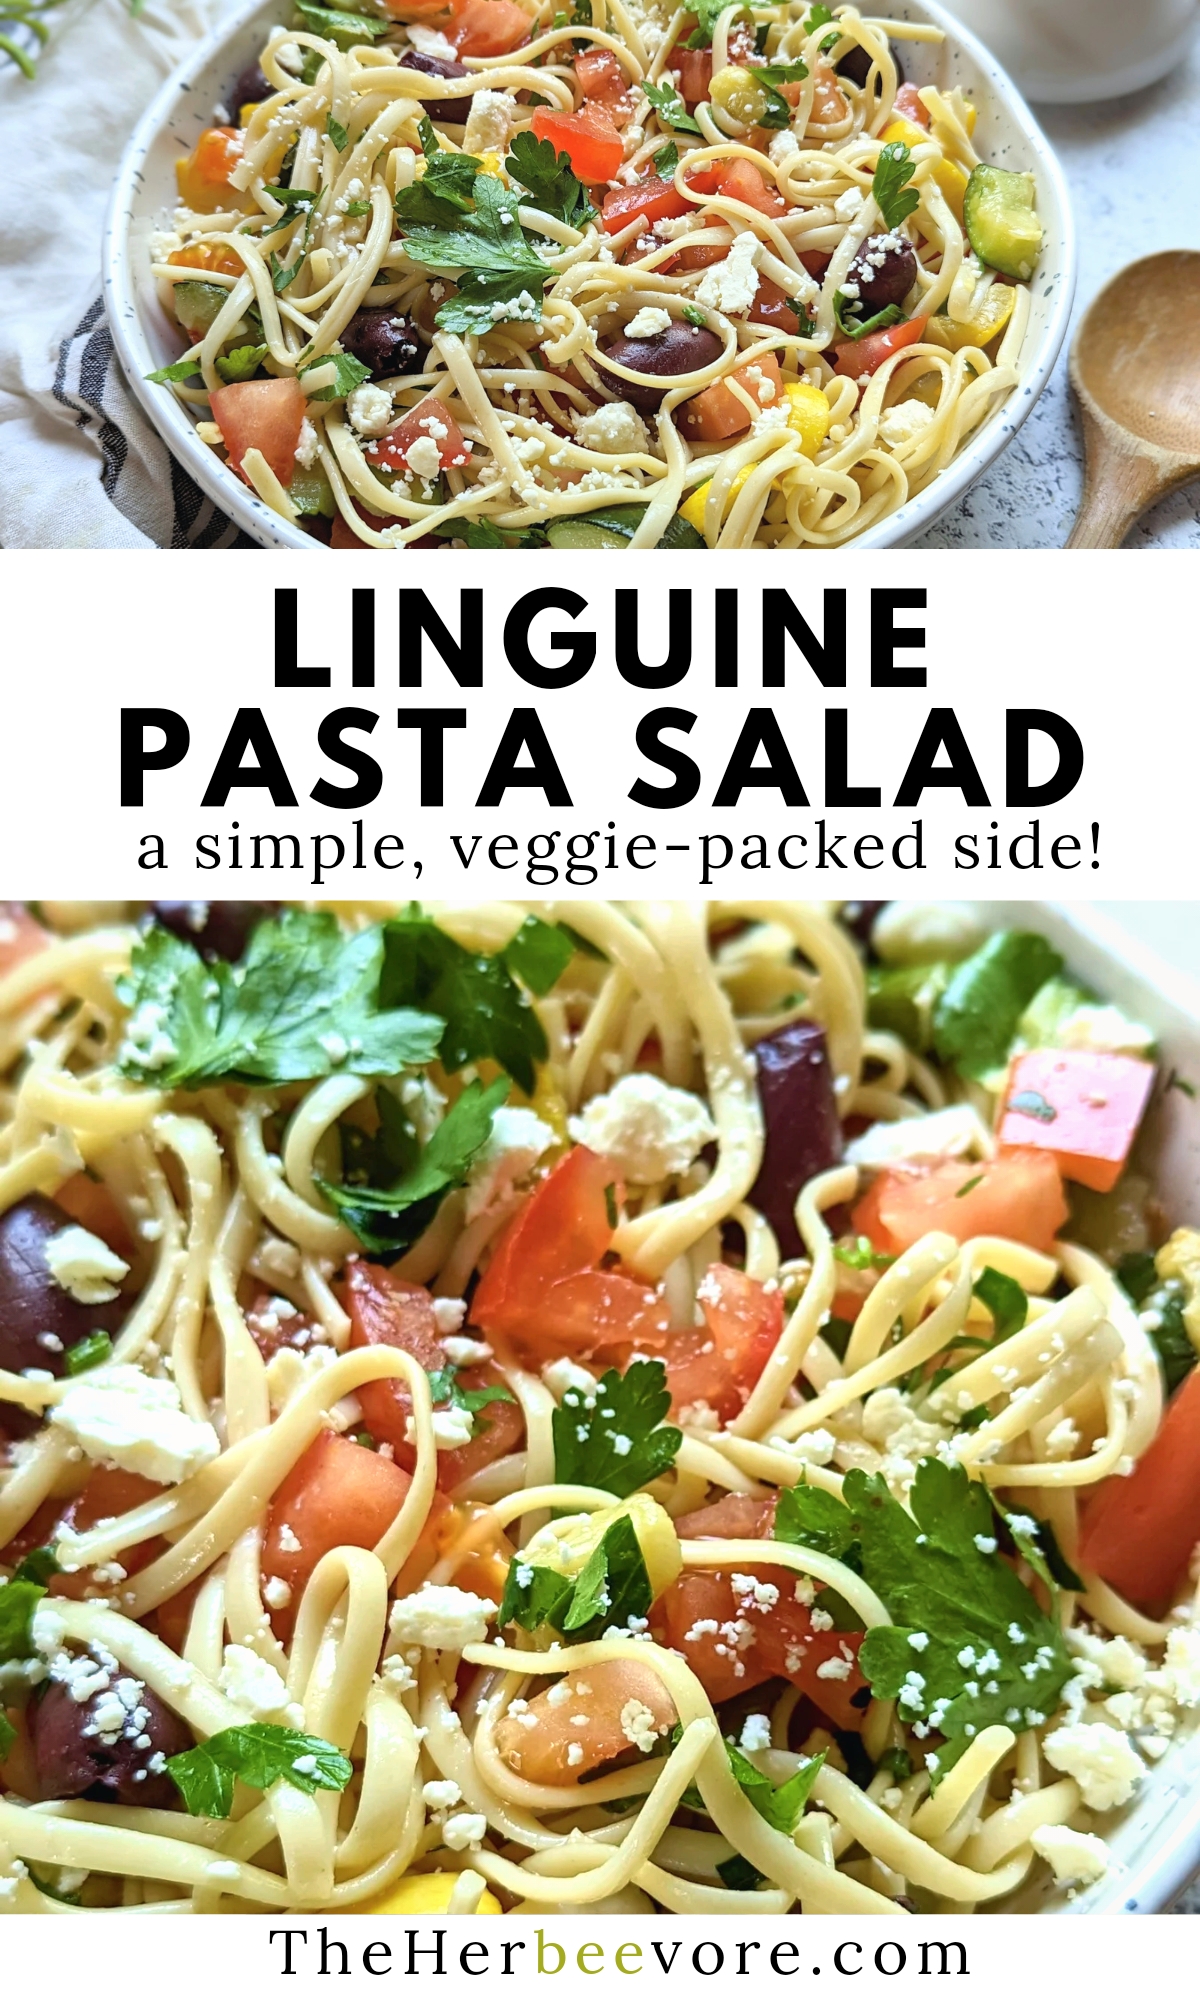 linguine pasta salad recipe with tomatoes cheese olives vegetables and a homemade red wine vinaigrette dressing